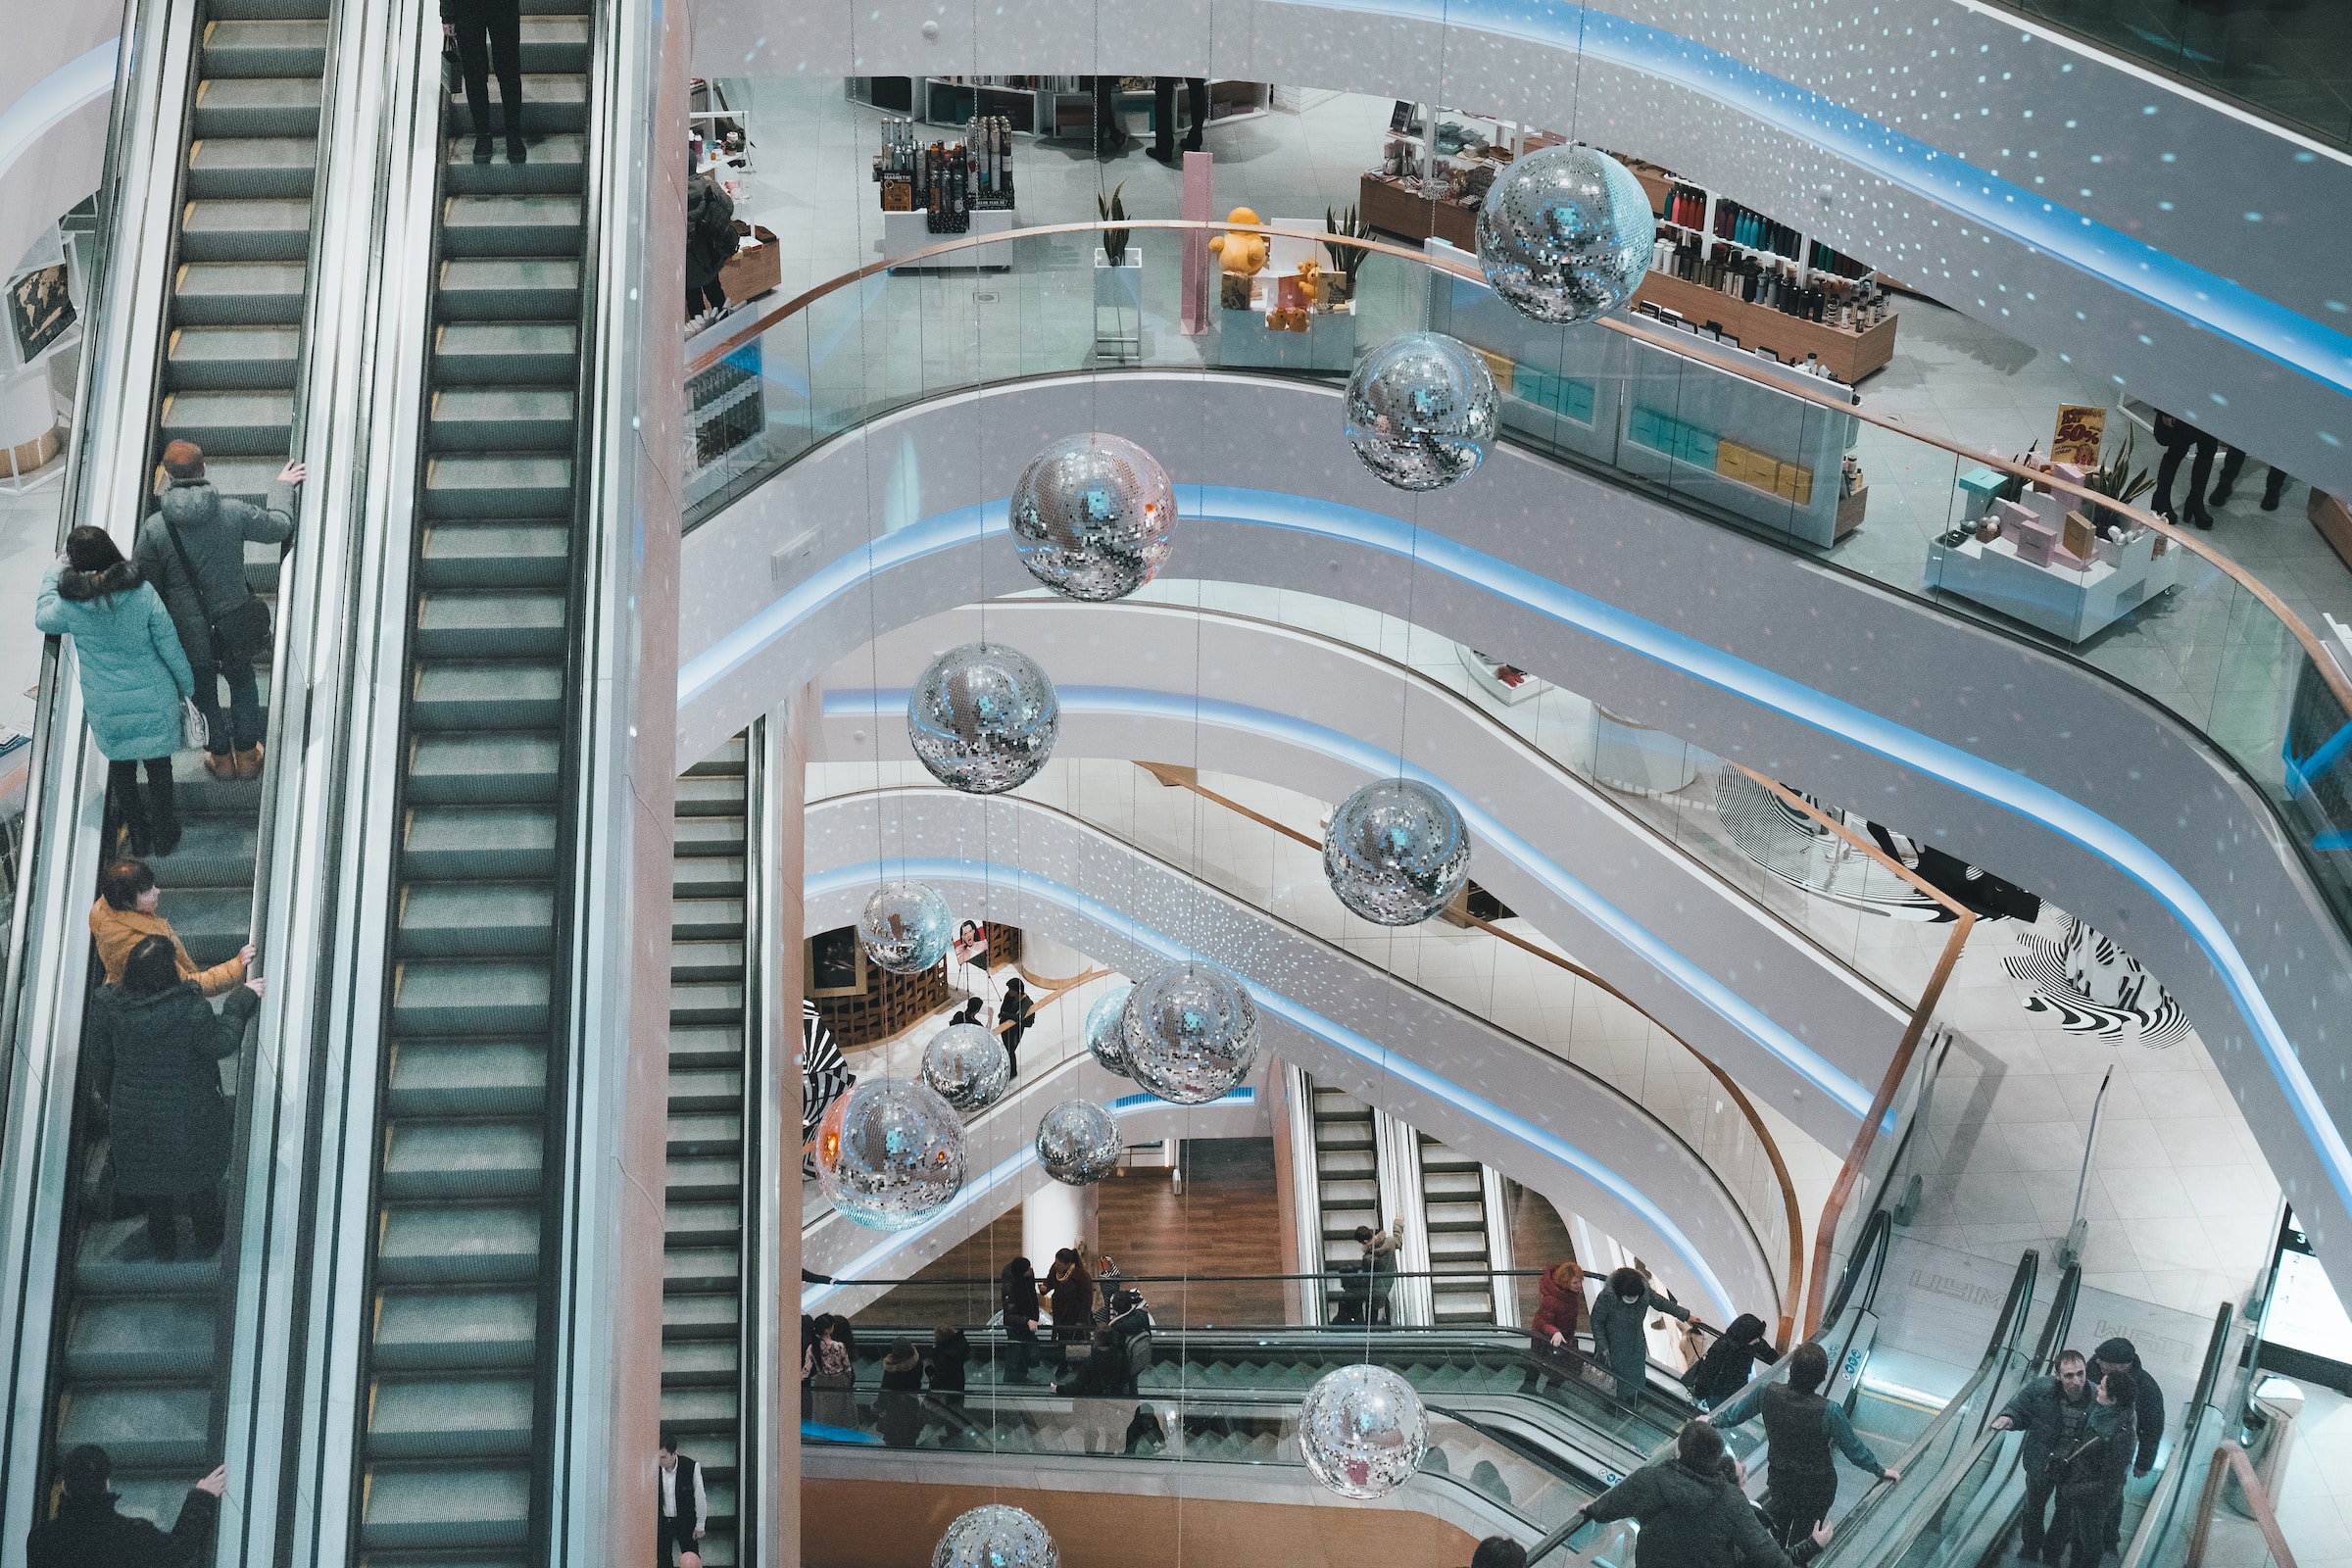 Department store with an escalator